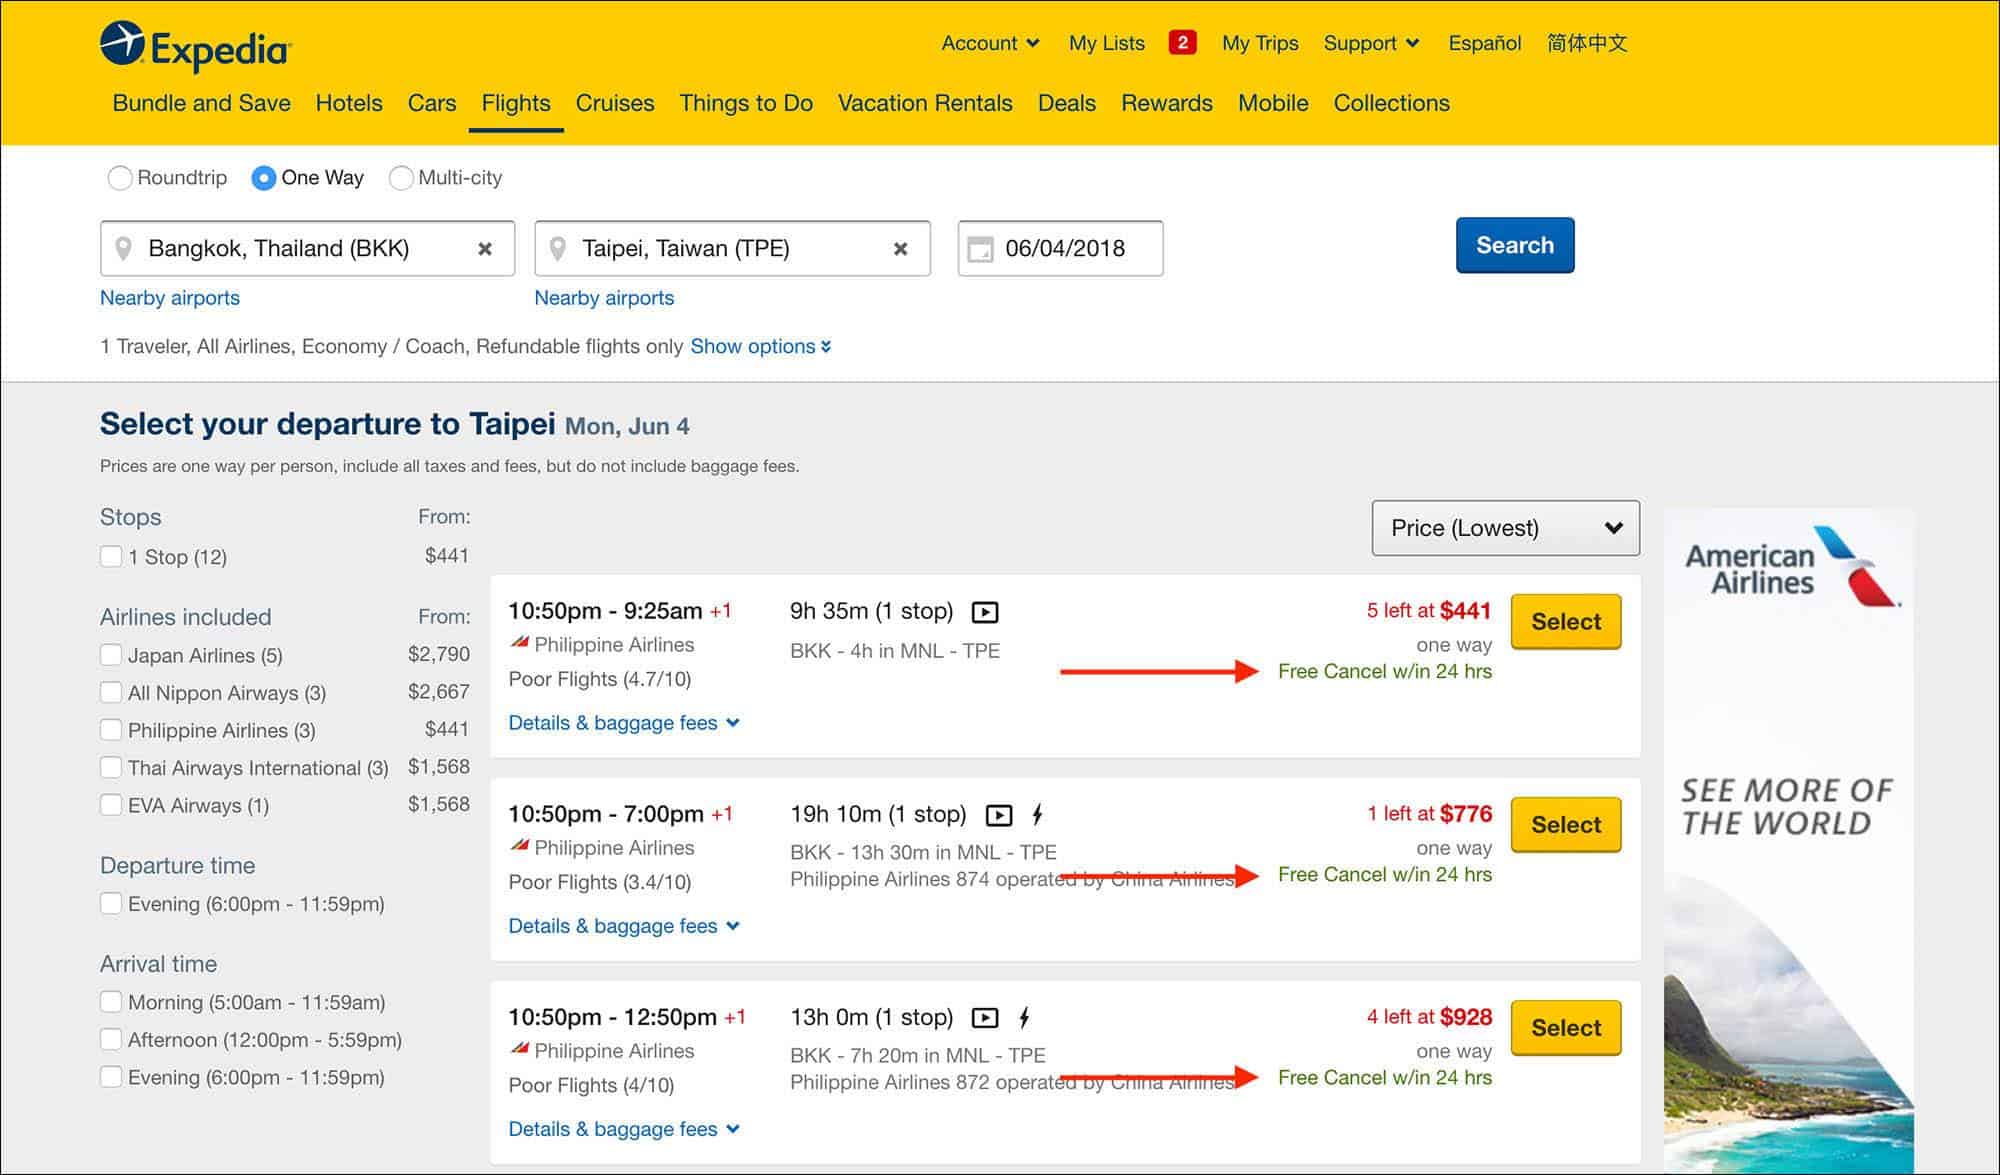 Book Flight Tickets with 24 hour FREE cancellation on Expedia - Select Flight